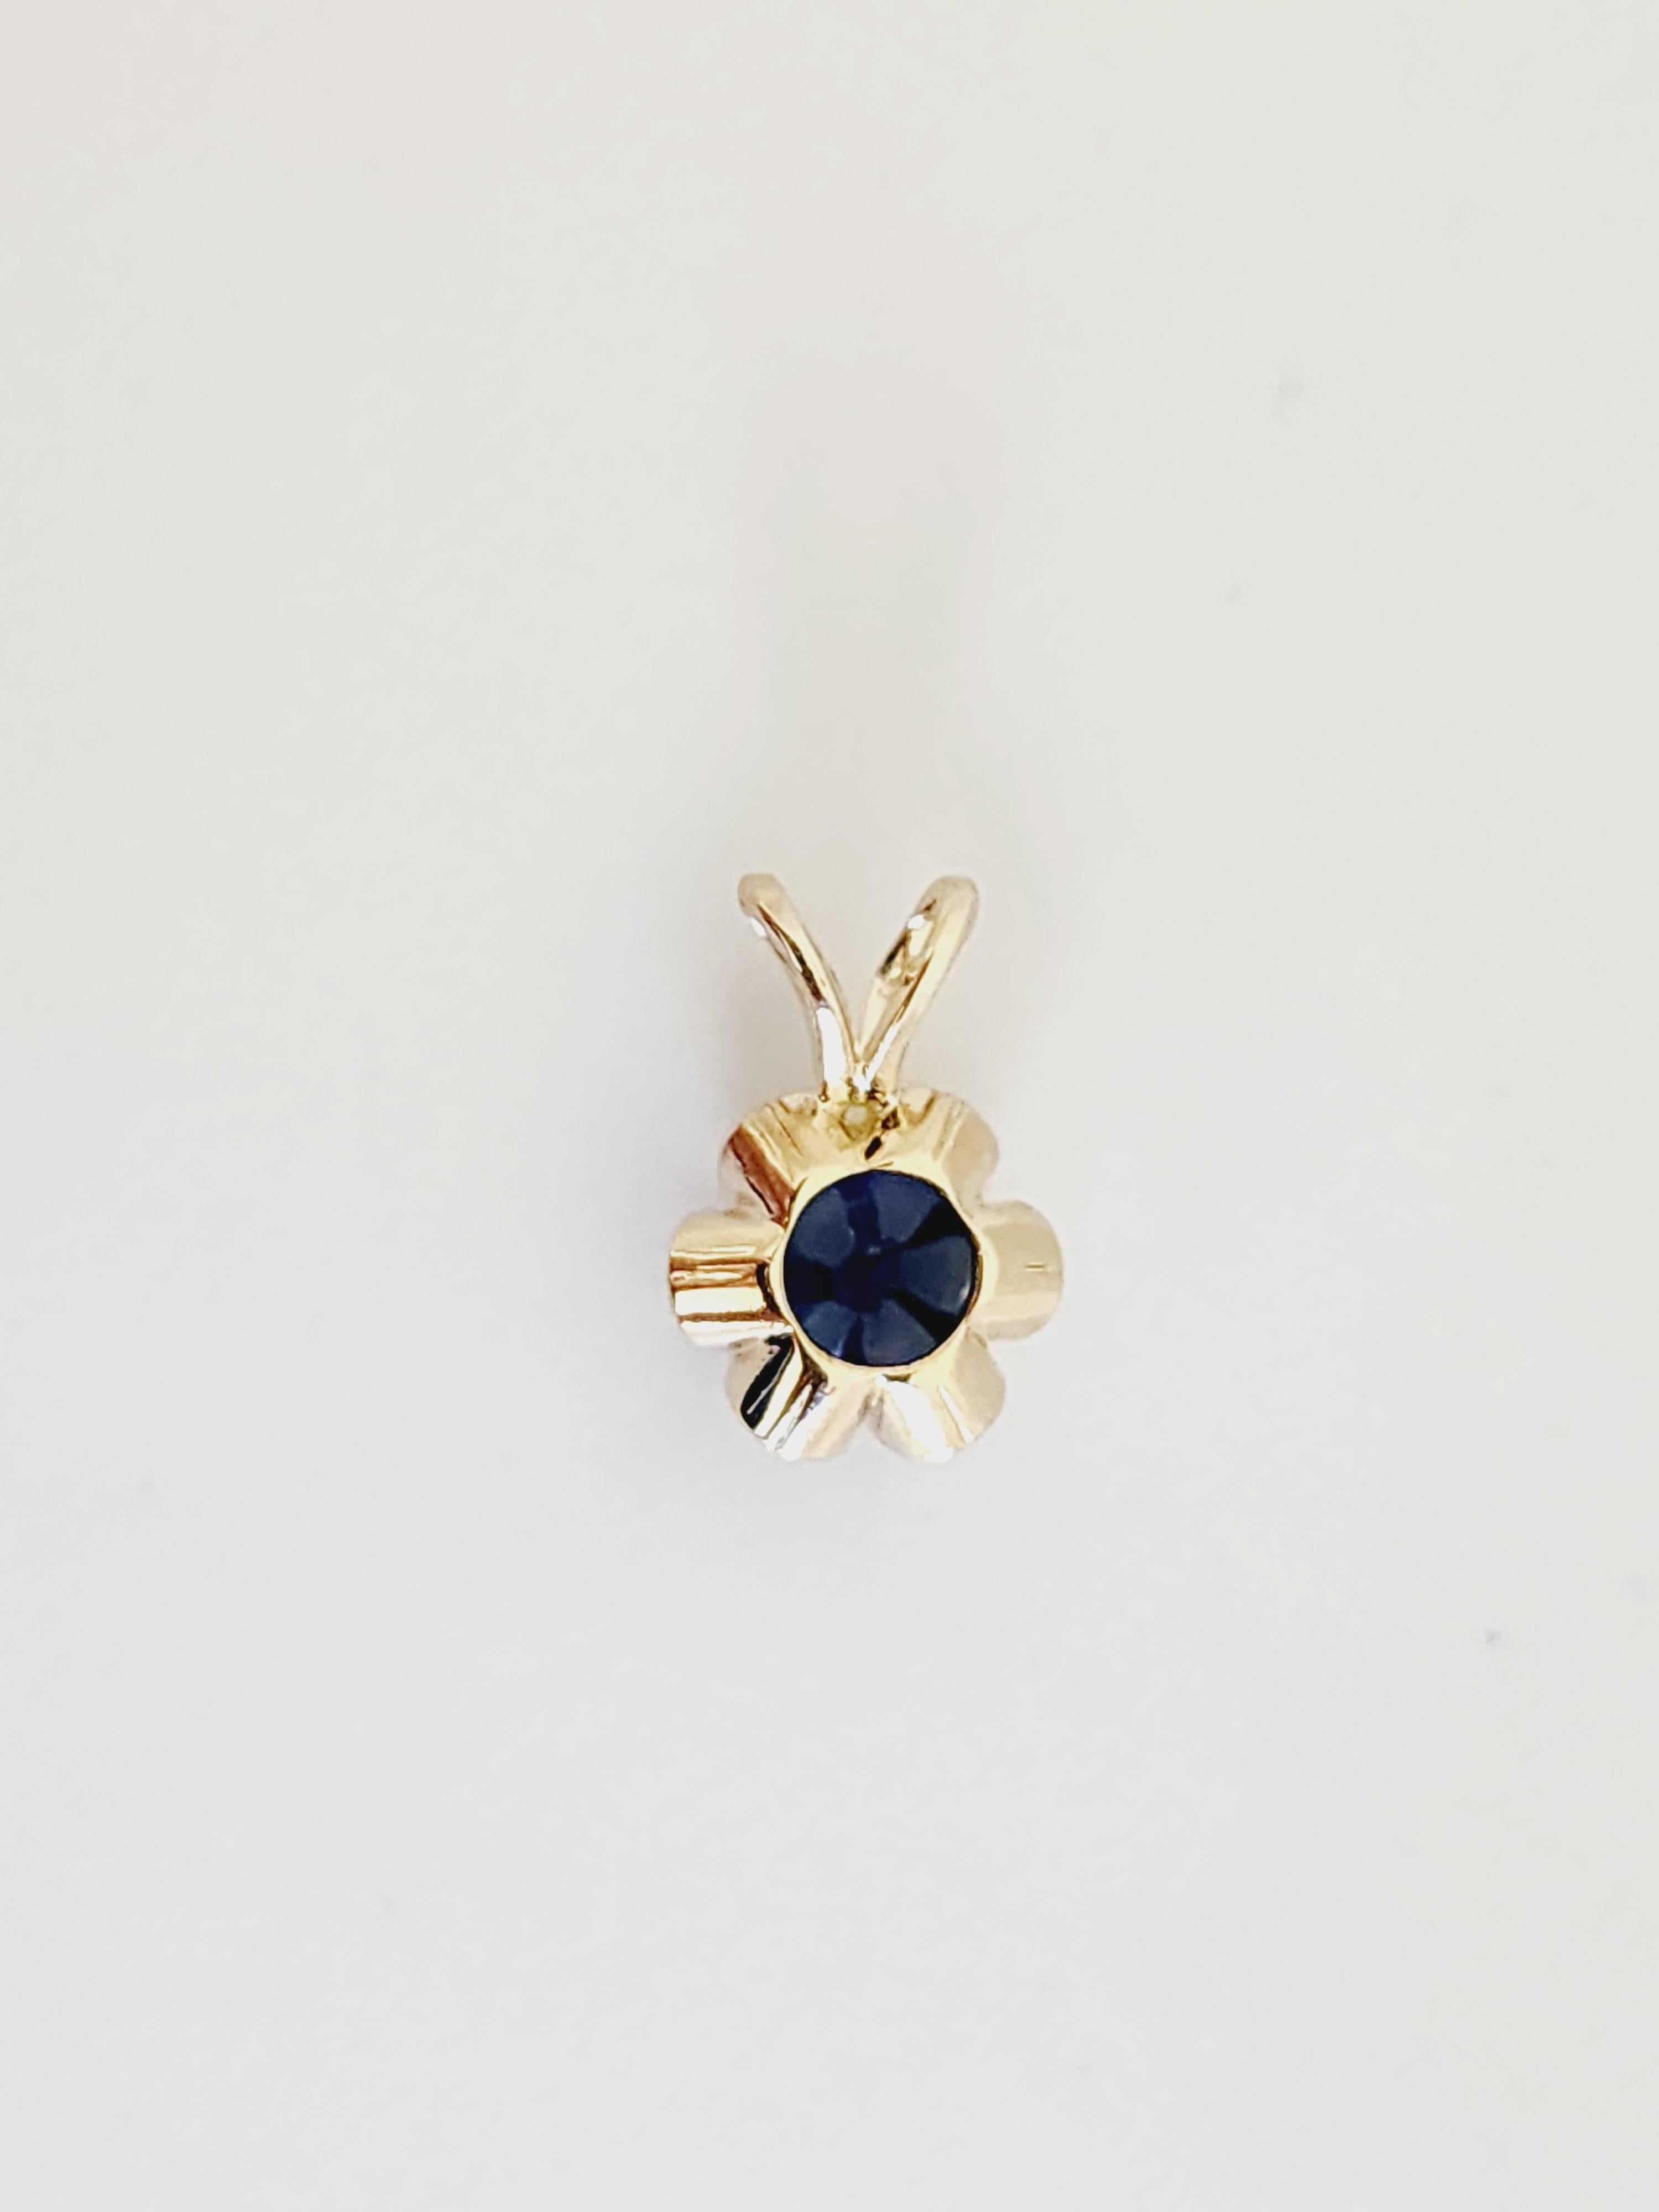 0.53 Carat Sapphire Pendant 14 Karat Rose Gold. Pendant measures approximately 0.45 inch length and 0.30 inch wide. 

(Pendant Only-Chain sold separately)